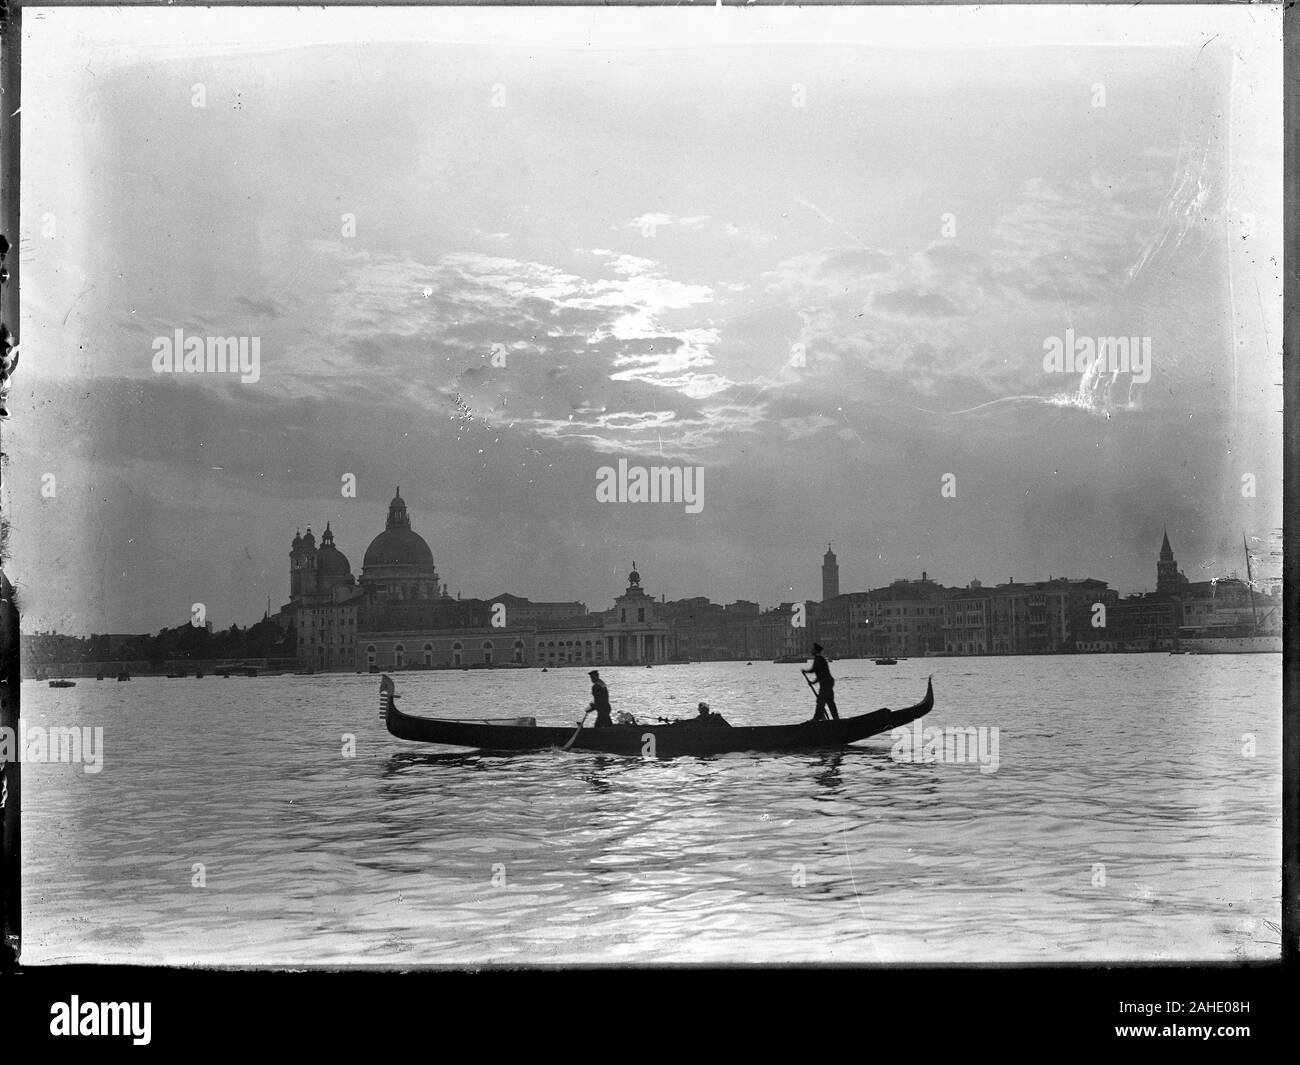 Black and white waterfront view of the Santa Maria della Salute church with a typical gondola in the foreground. The picture is a copy from a dry glass photograph from the 1910s contained in the Herry W. Schaefer Ottoman collection. Stock Photo